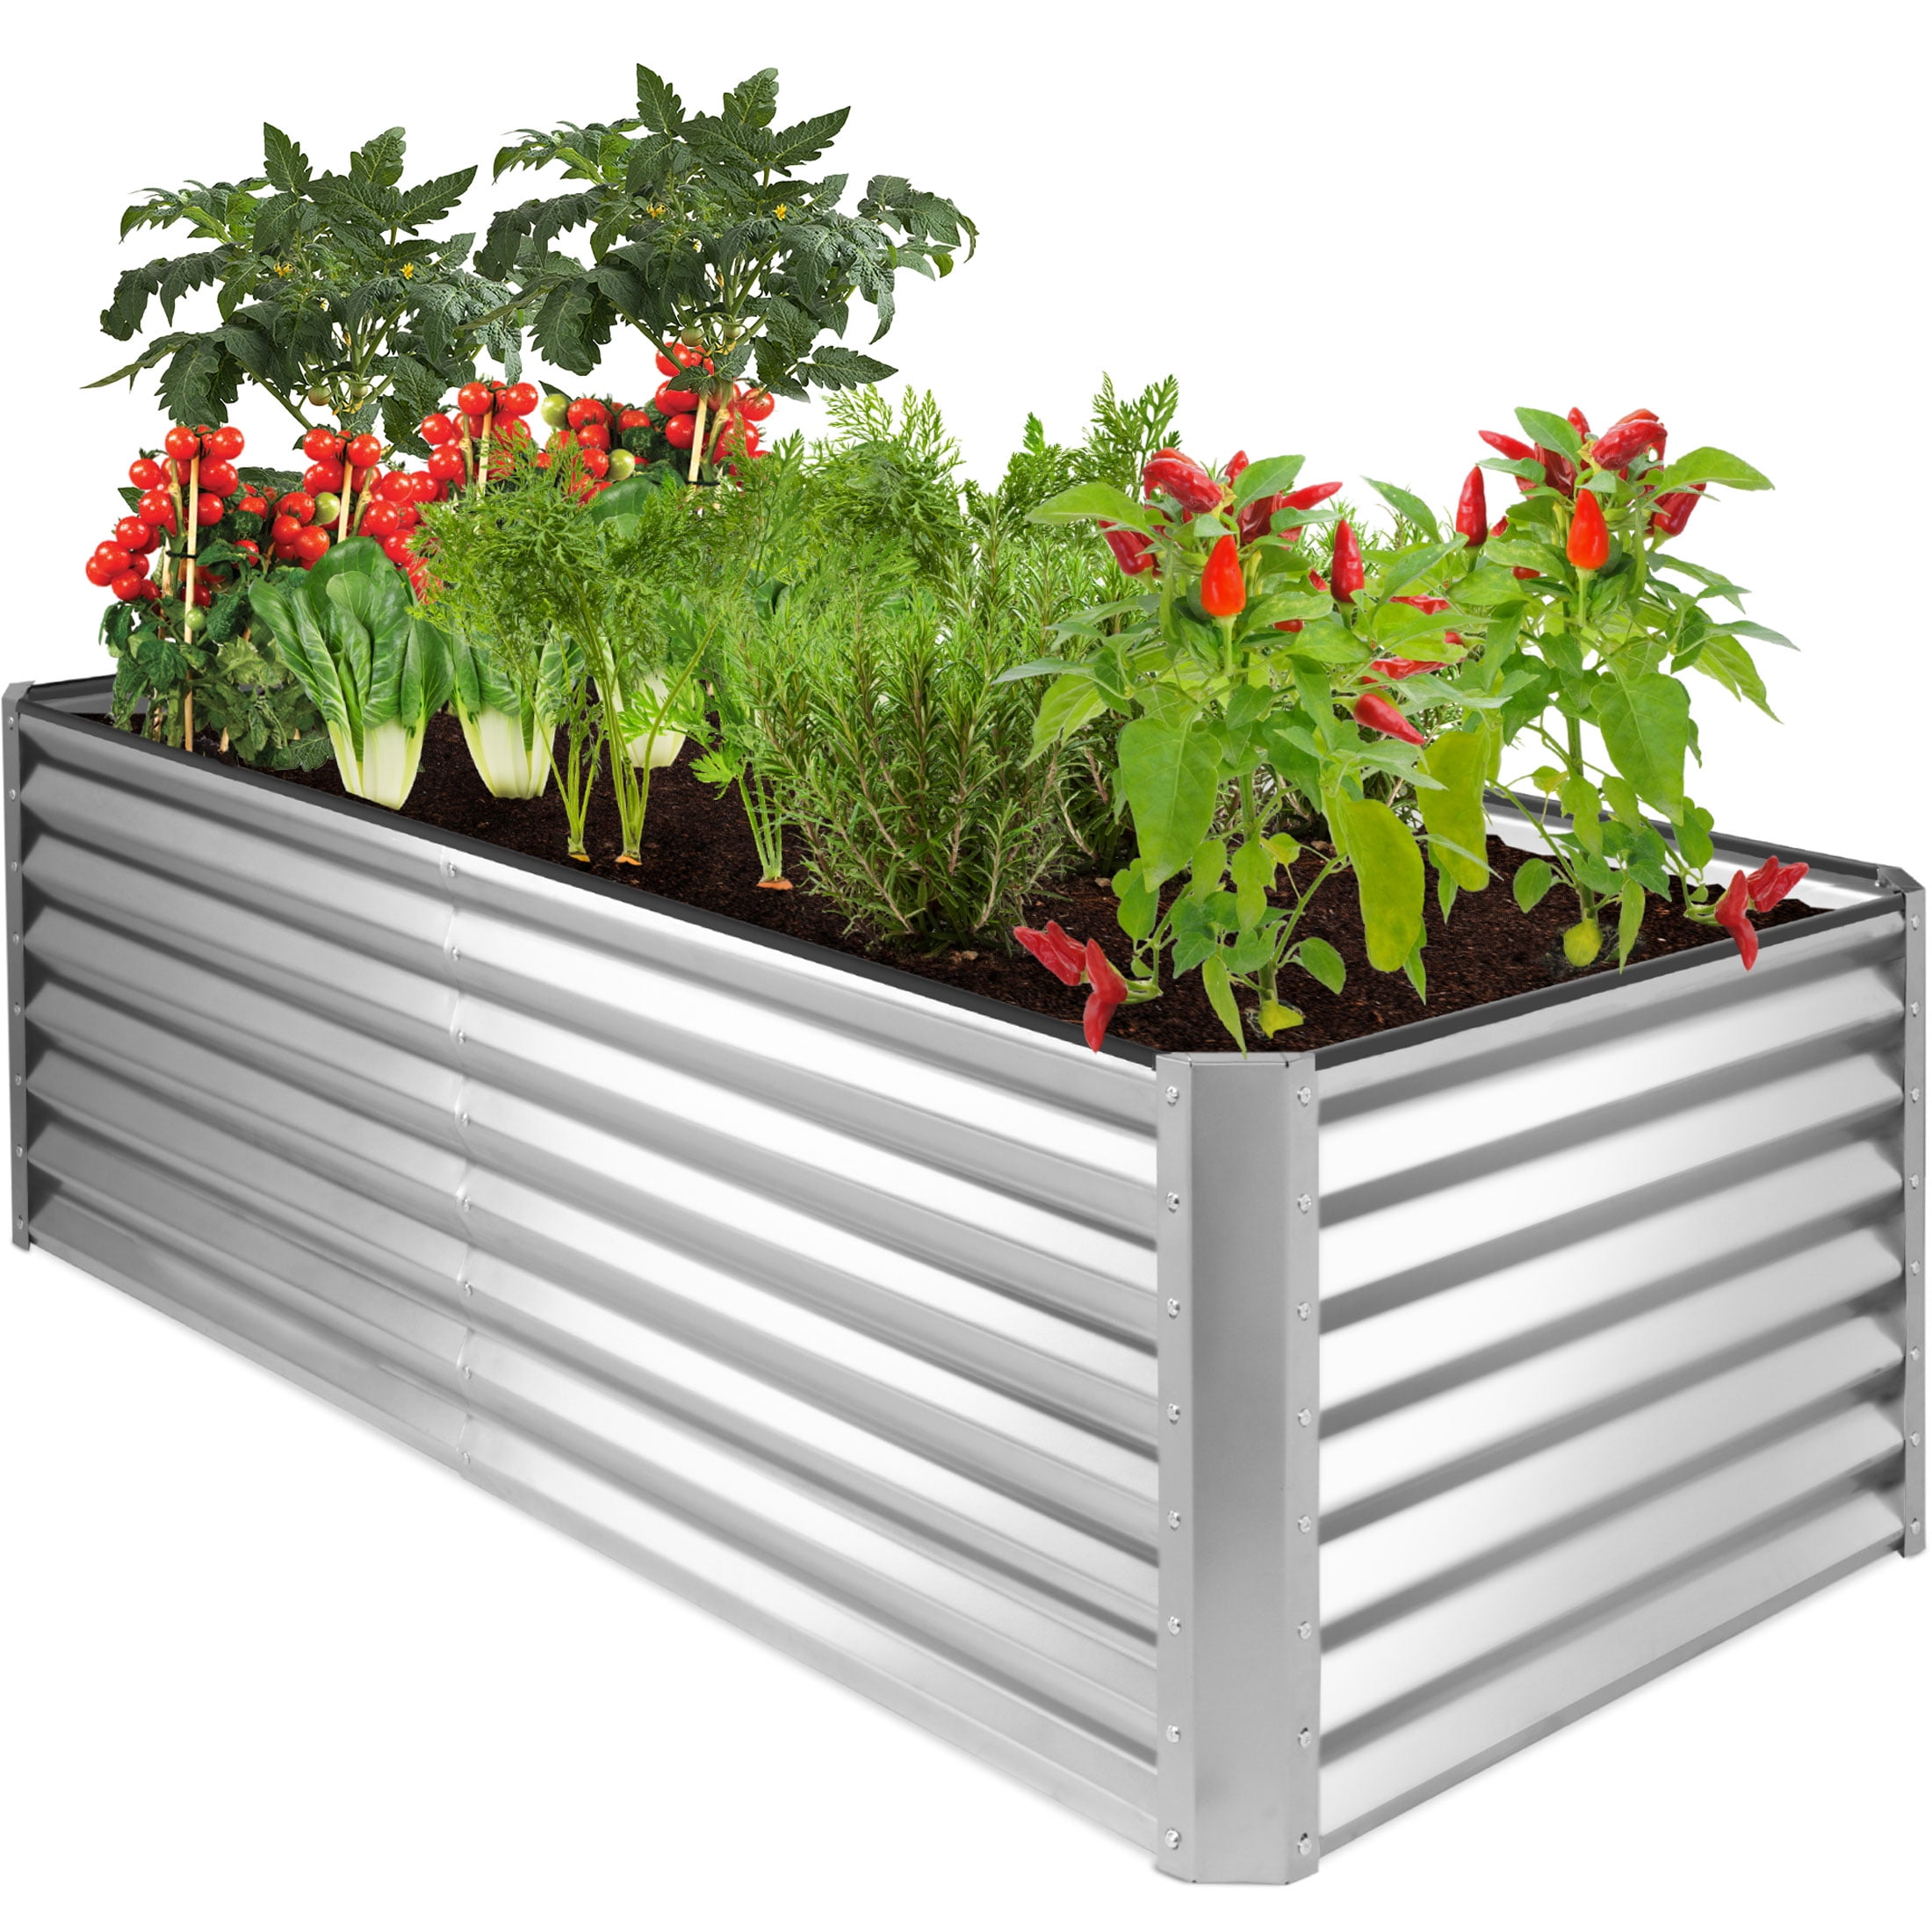 Image of Best Choice Products outdoor metal raised garden bed image 1